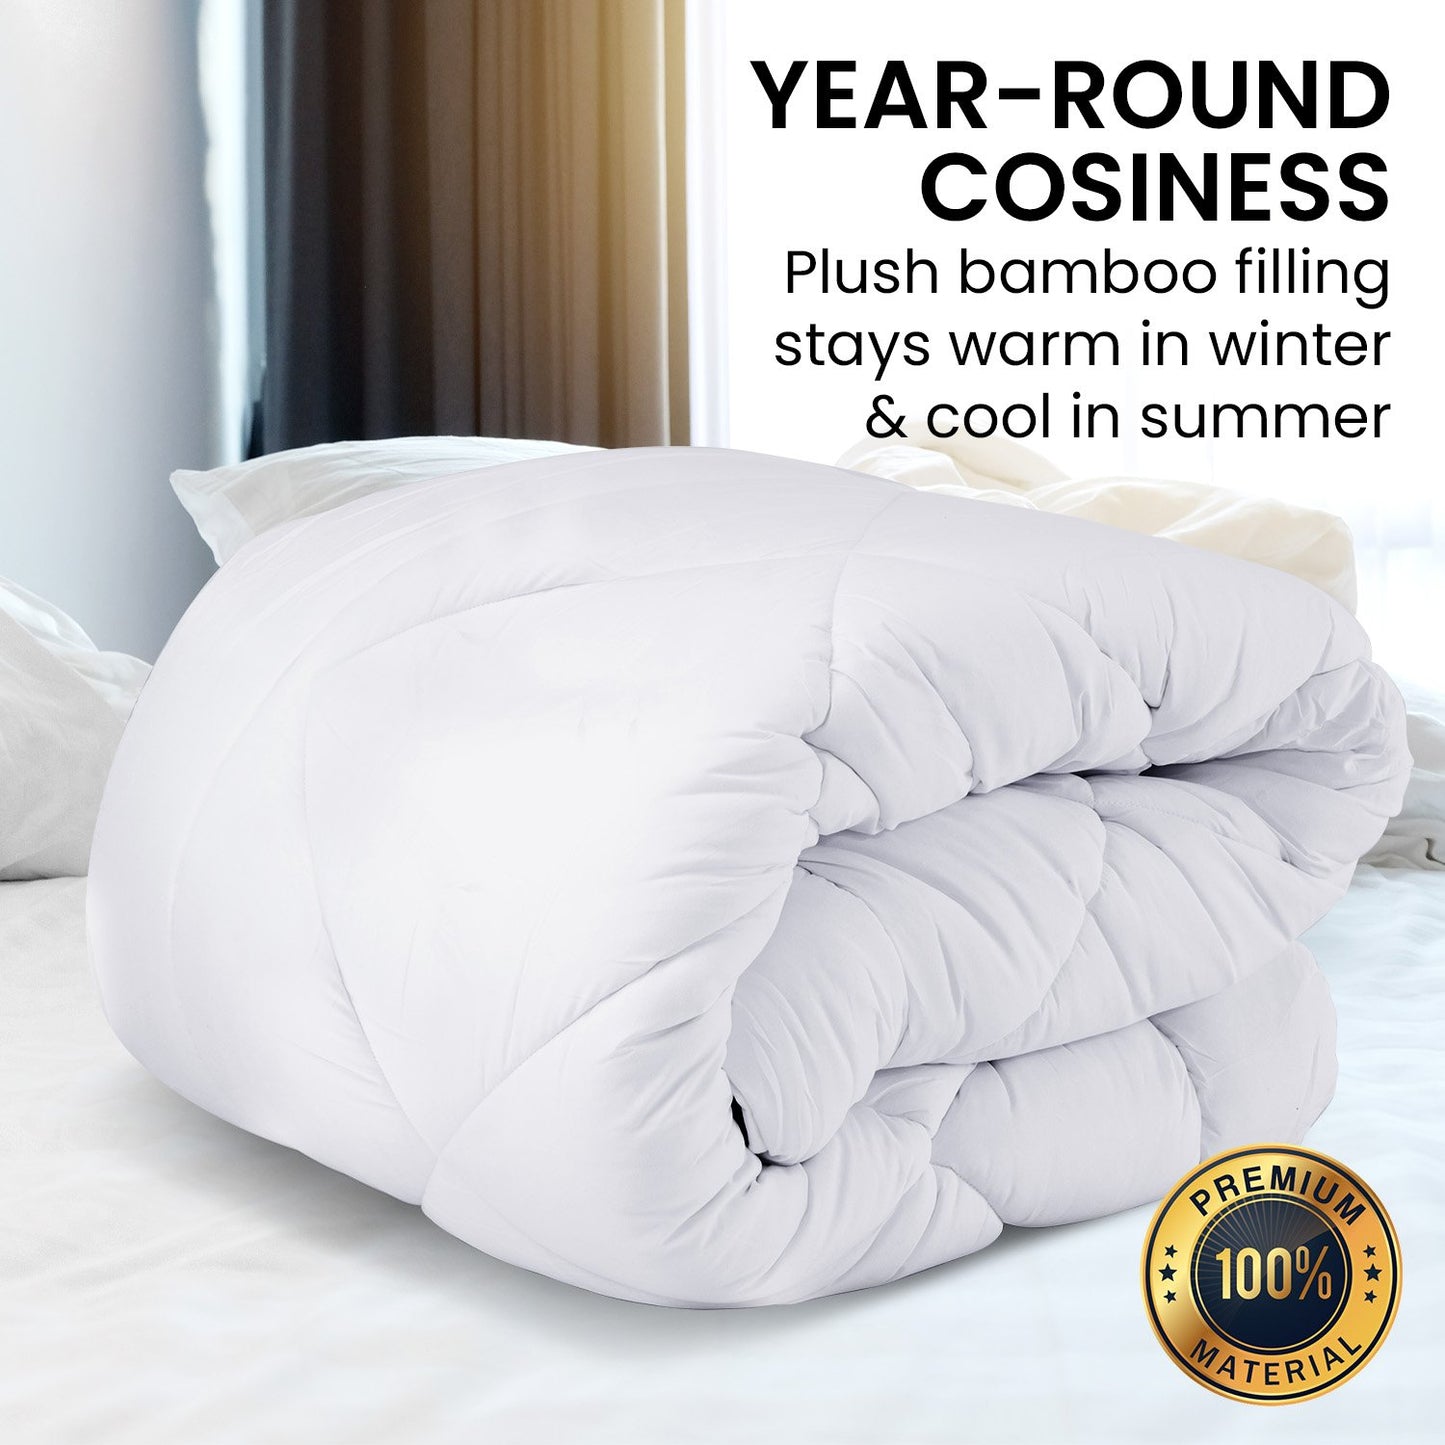 Laura Hill 800gsm Microfibre Bamboo Quilt Comforter - King